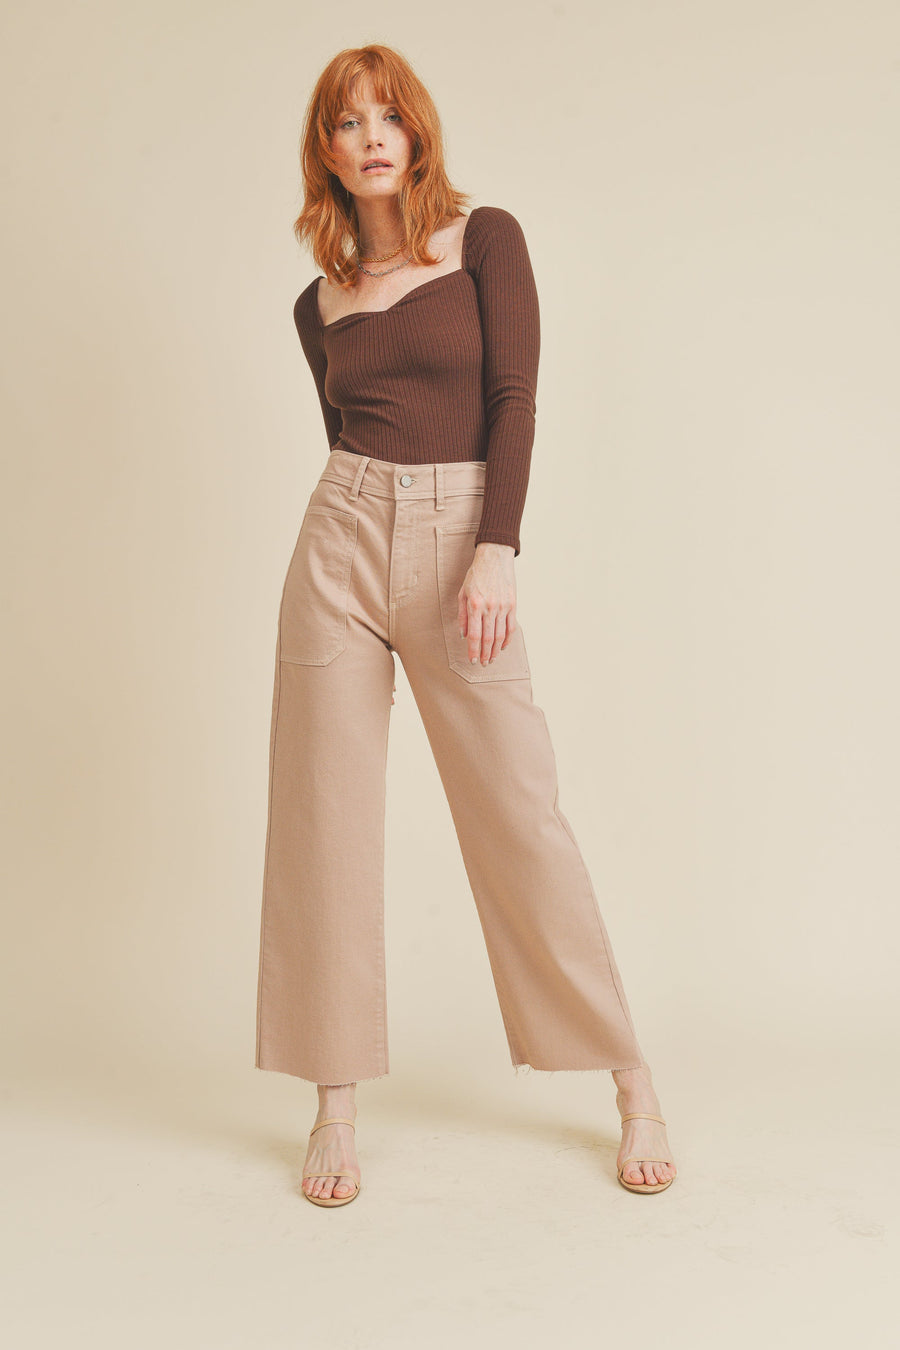 Wide leg cropped jeans in the color clay.